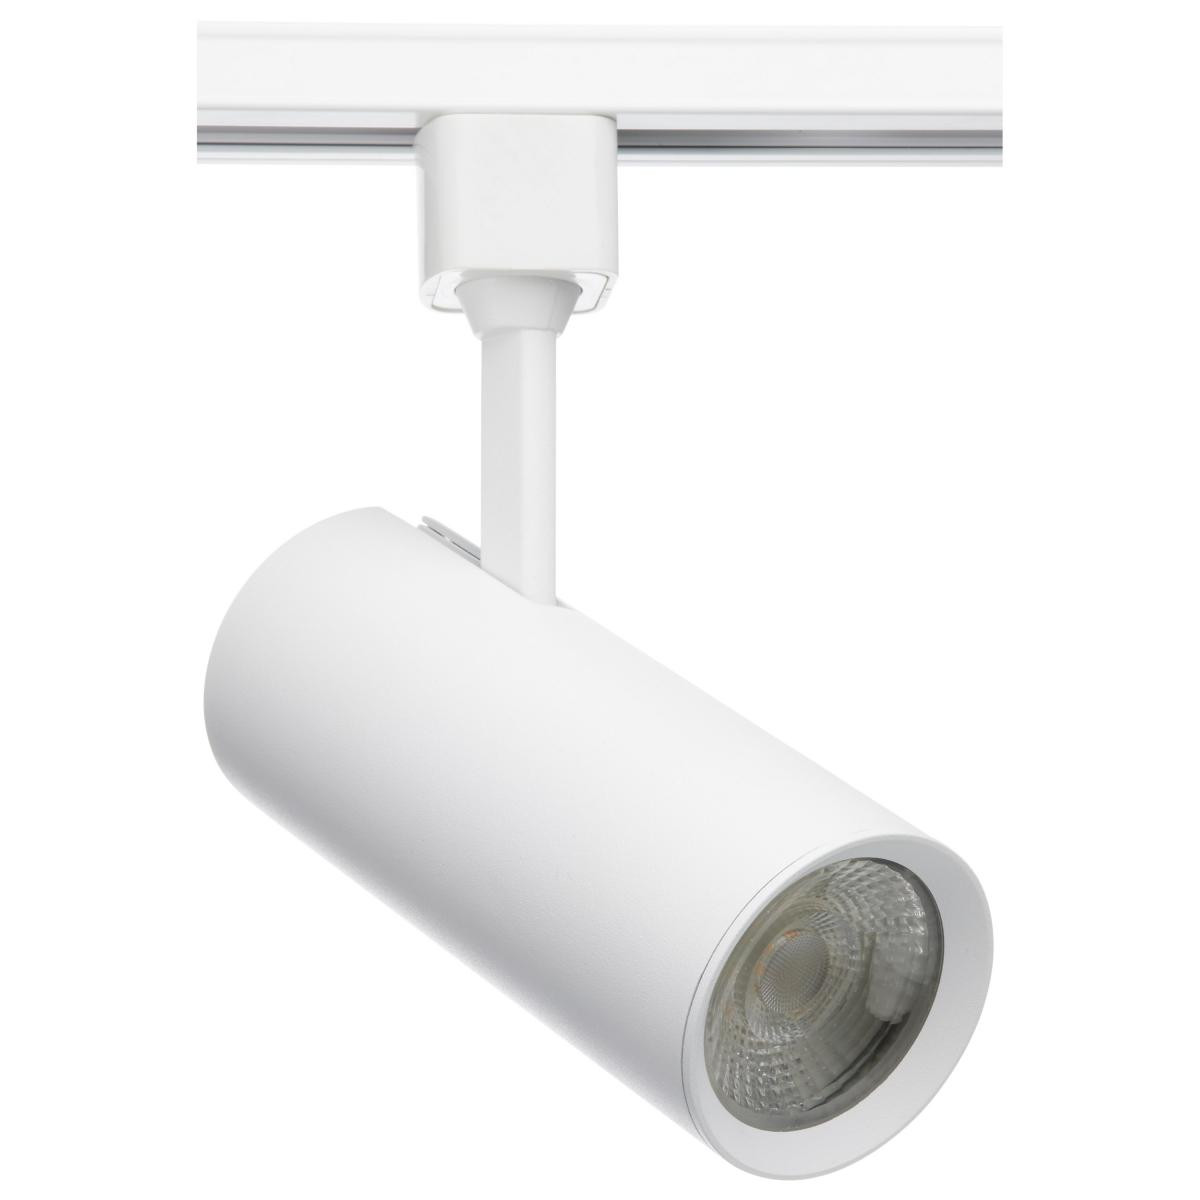 Commercial Style LED Track Head Only  - White Finish - 24 Degree Beam - 1200 Lumens - 3000K Soft White - 20 Watt - Dimmable - 3 Contact Halo Style